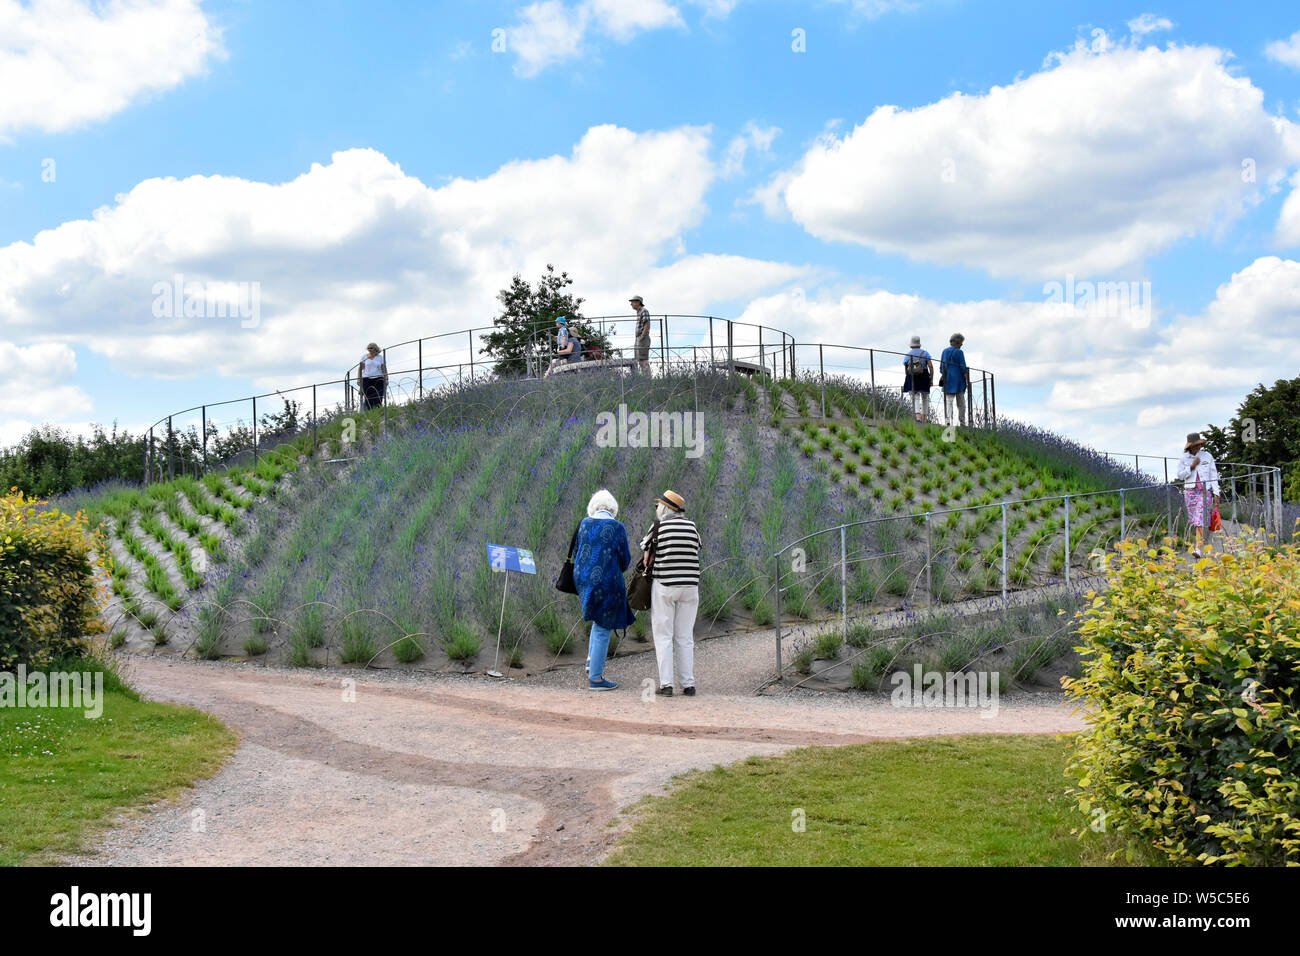 RHS Wisley garden & viewing mount new planting of lavender & rosemary visitors can  walk short winding path for views of the gardens Surrey England UK Stock Photo